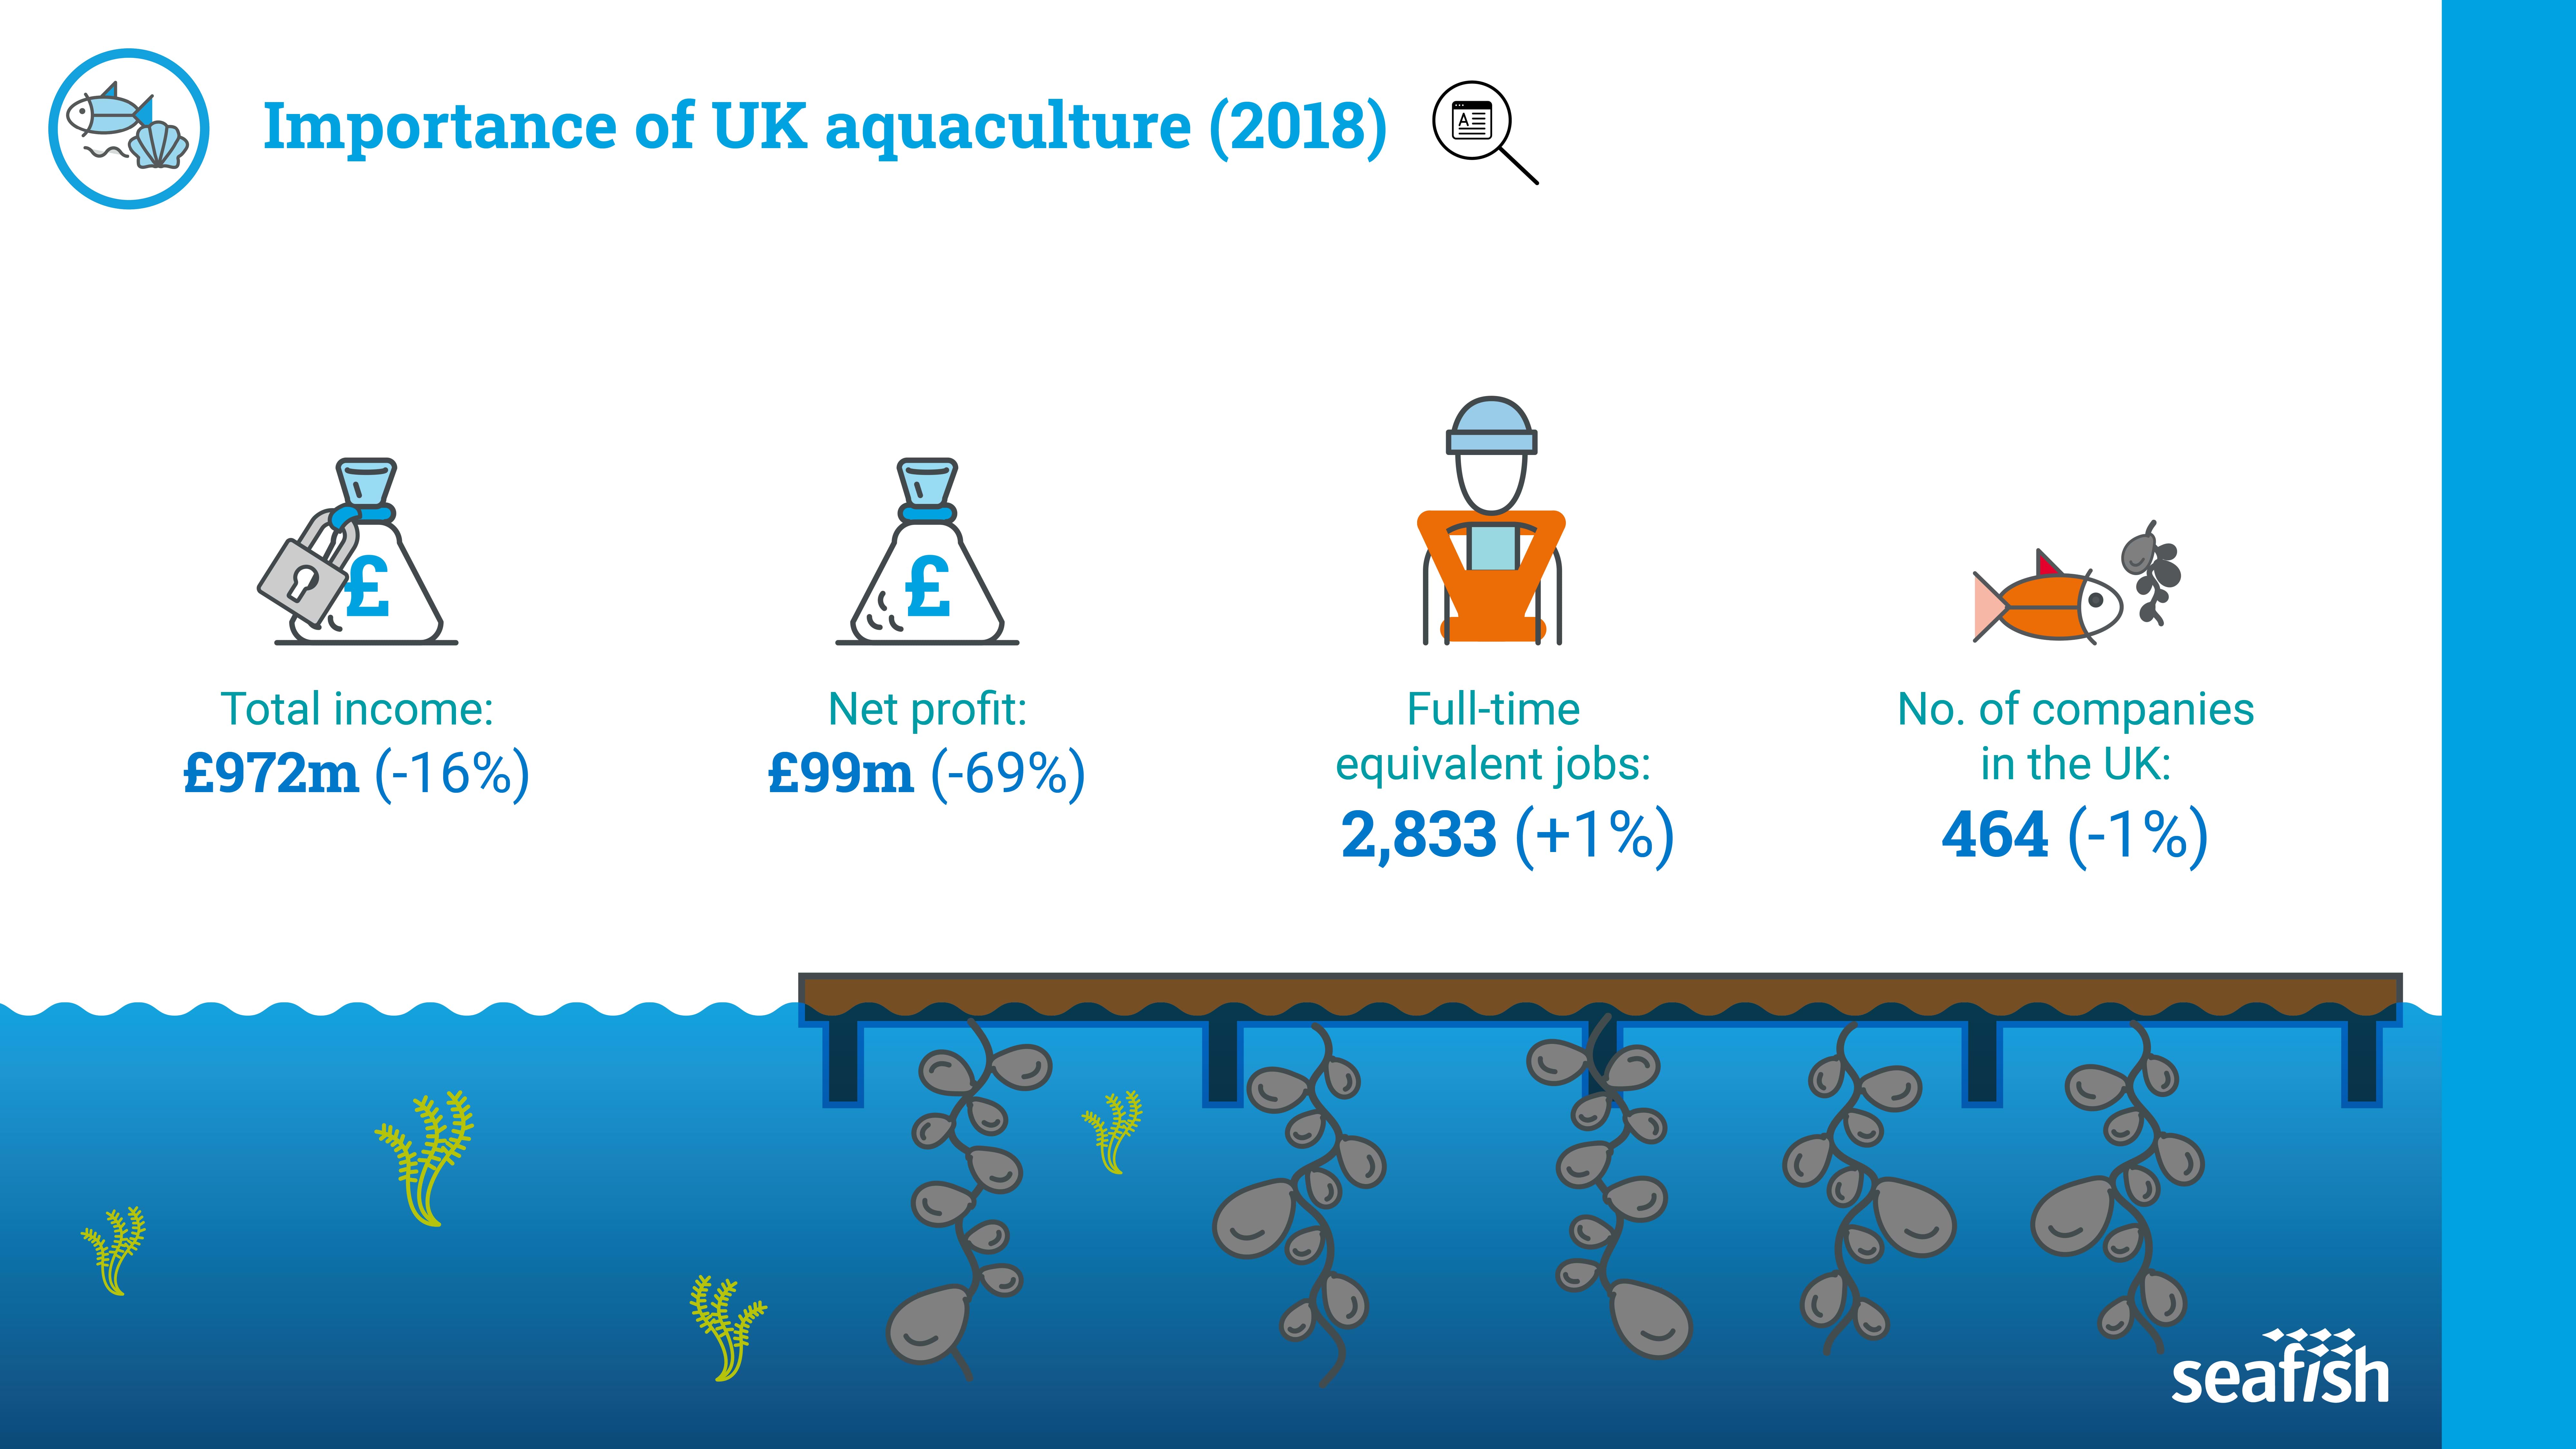 Infographic showing the importance of UK aquaculture via income, net profit, jobs and number of companies in the UK